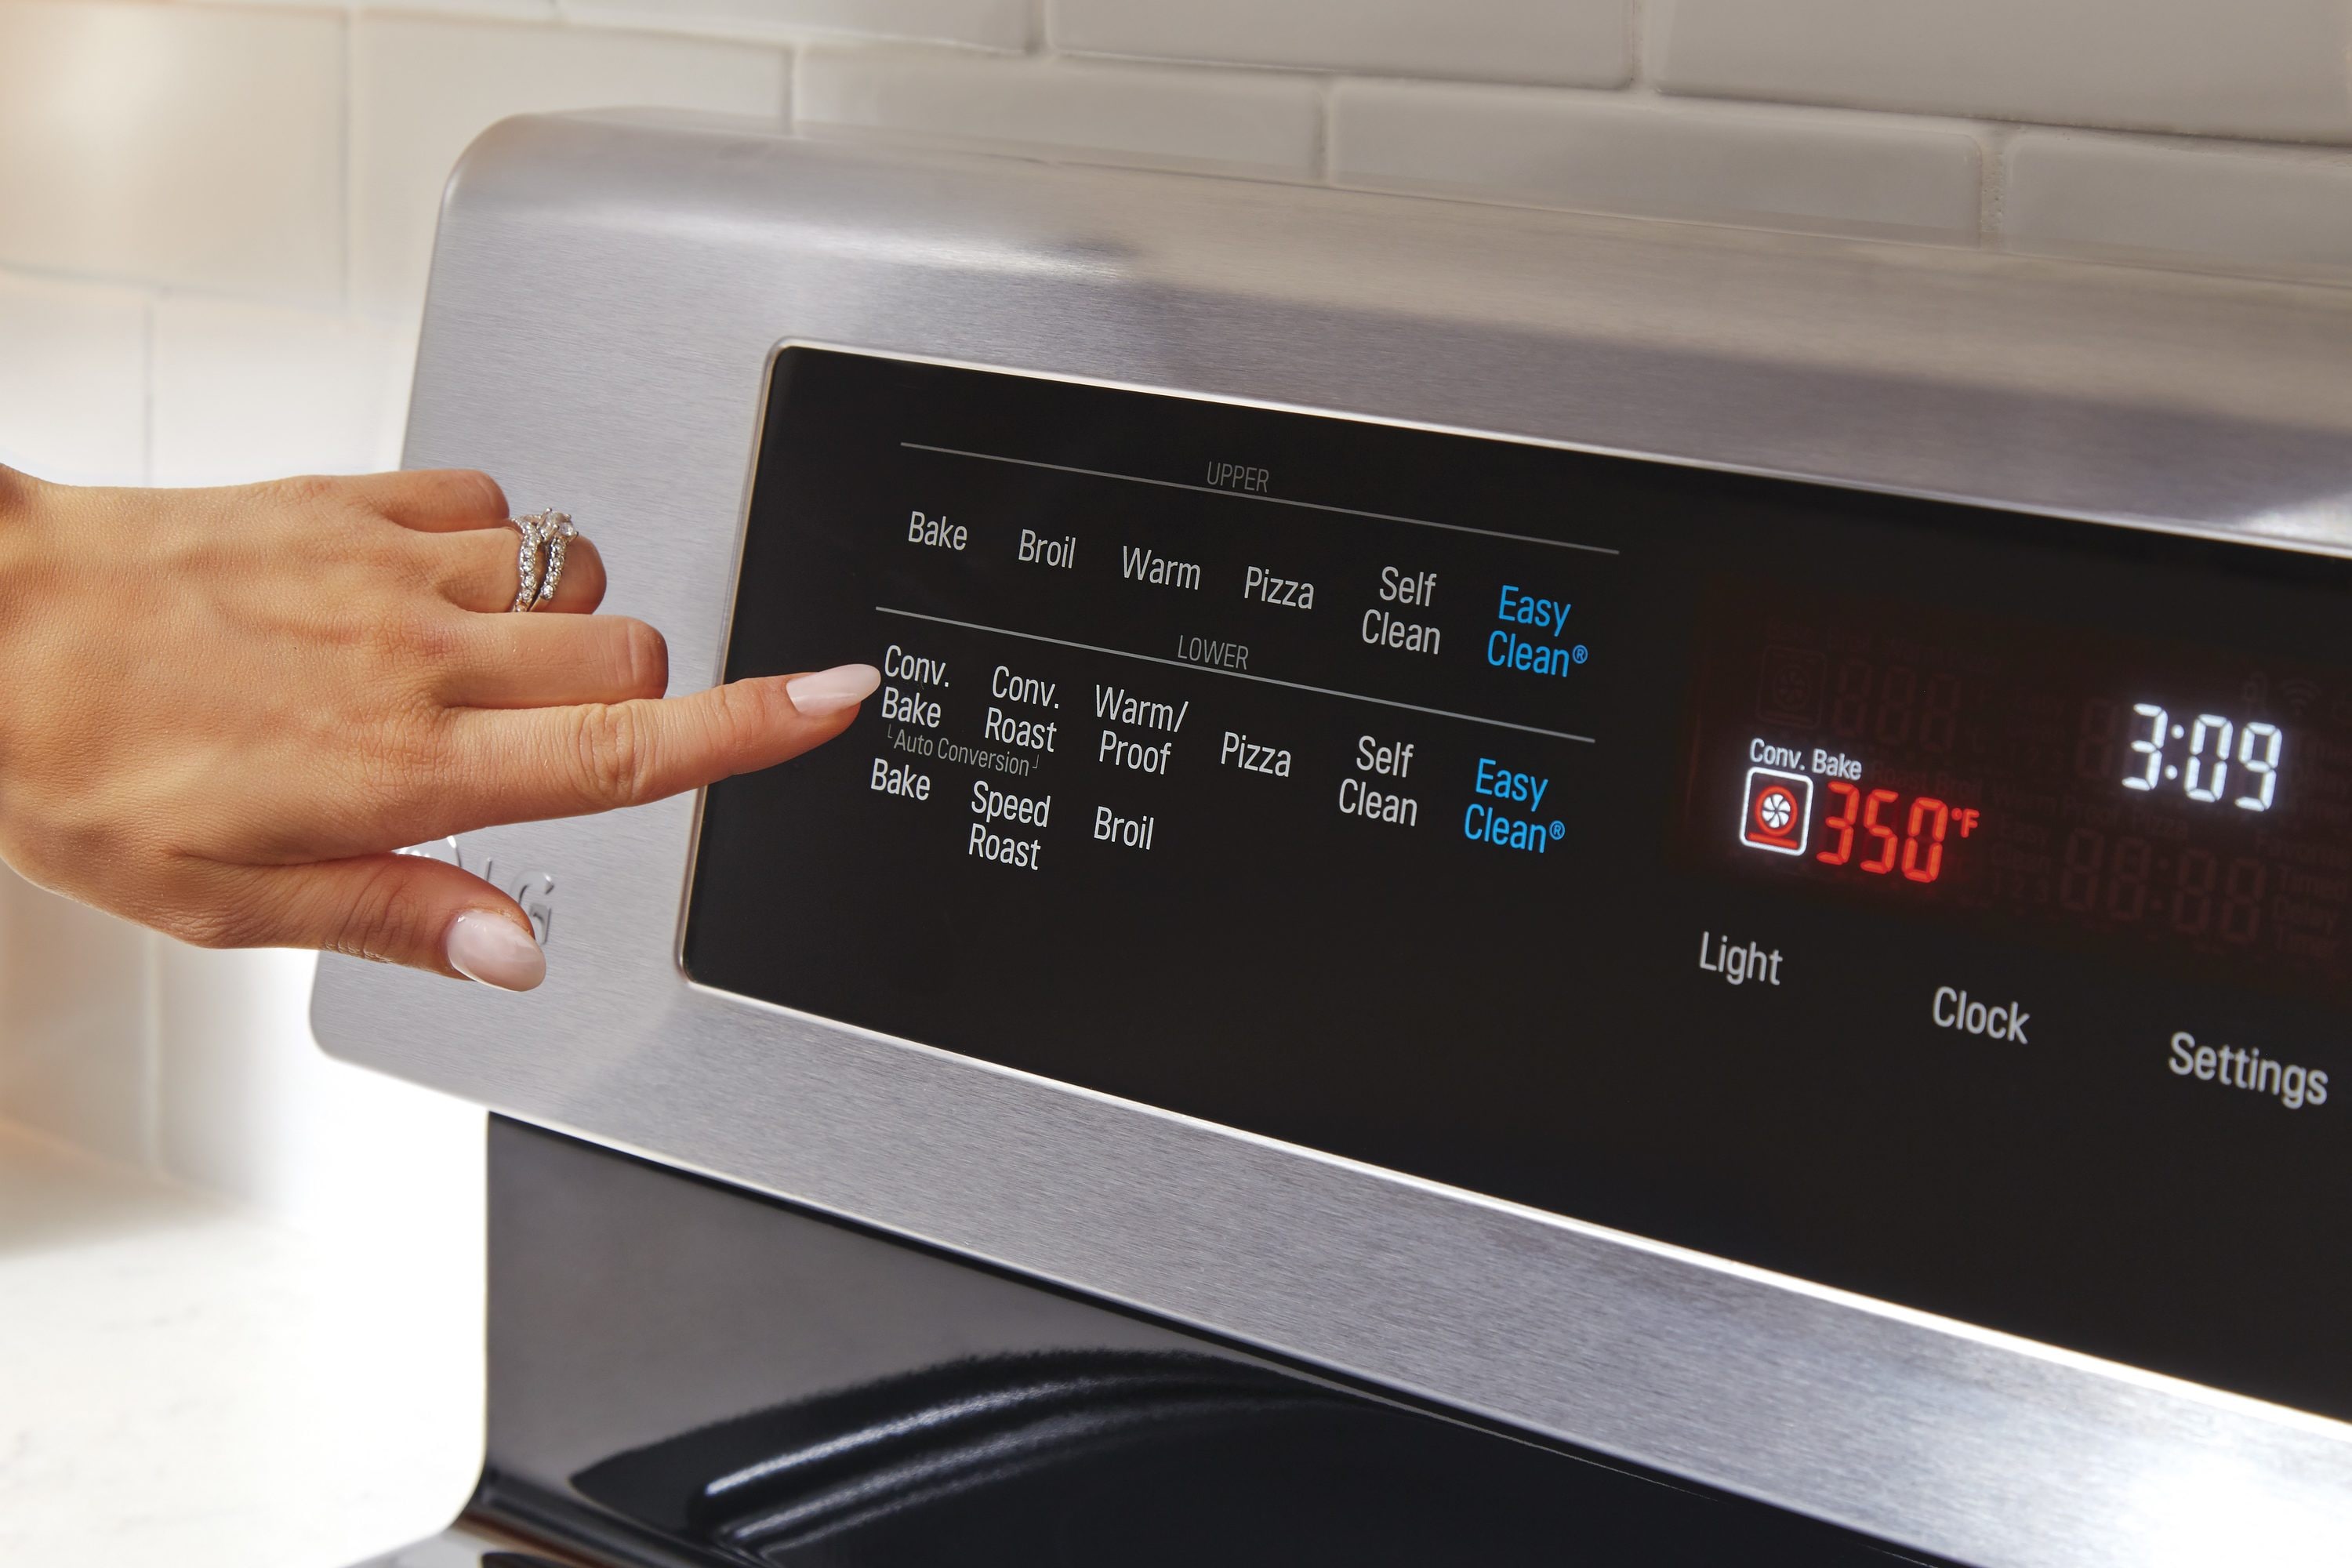 7.3 cu. ft. Smart wi-fi Enabled Electric Double Oven Slide-In Range with  ProBake Convection® and EasyClean®